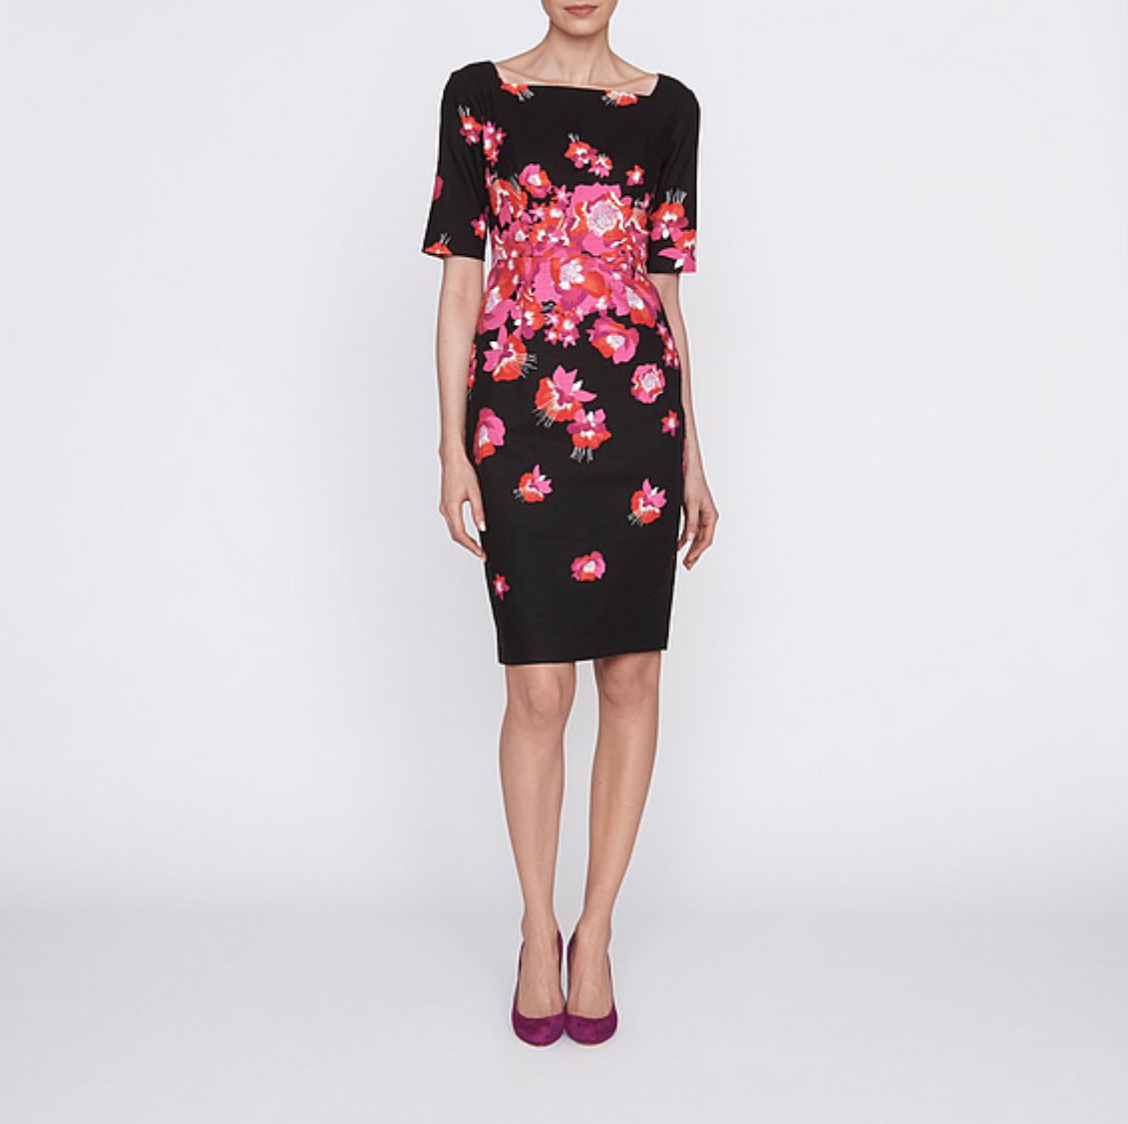 L.K. Bennett Lasana Dress in black with pink, orange and red poppies